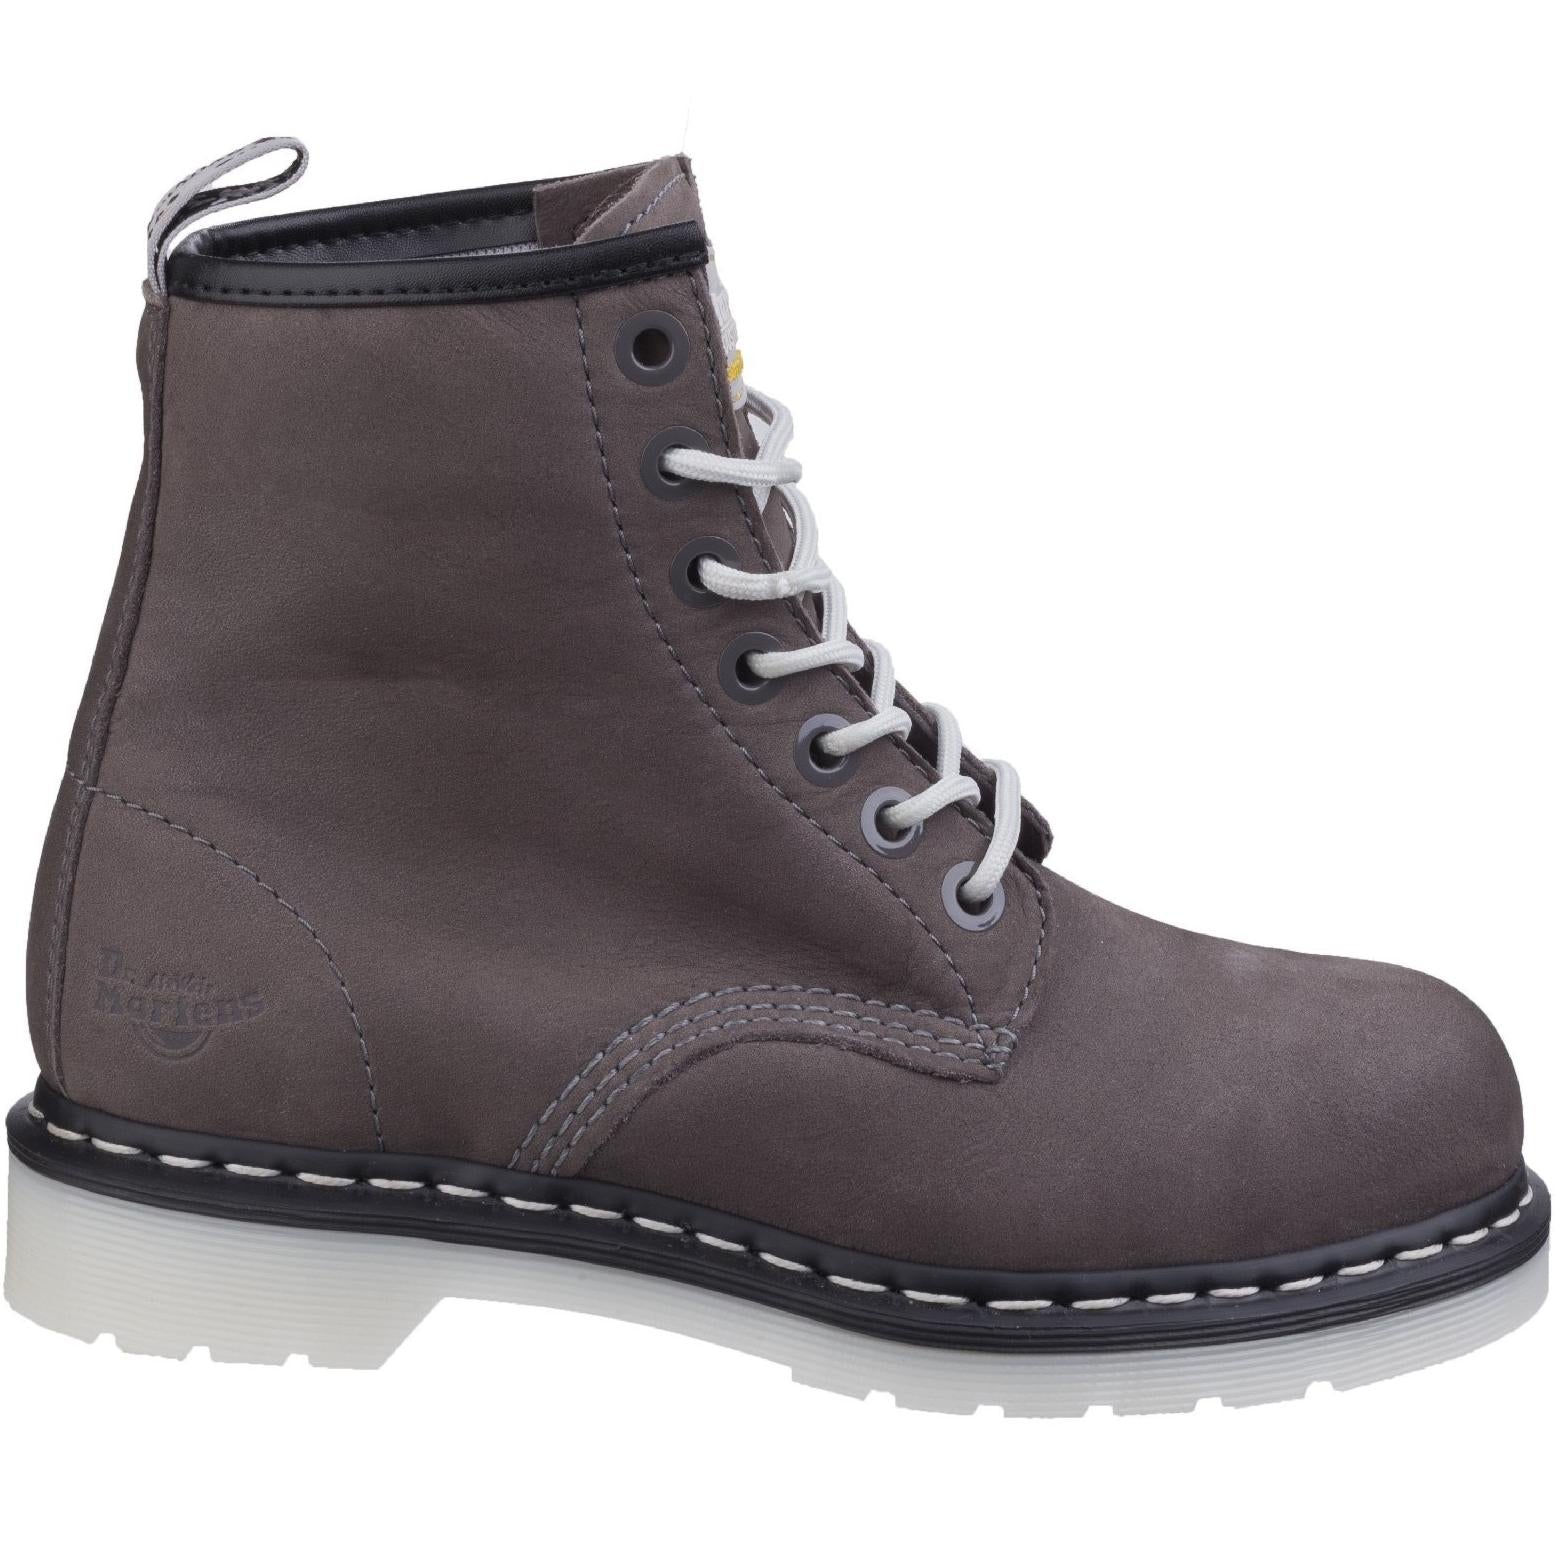 Dr. Martens Maple Classic Steel-Toe Work Boot